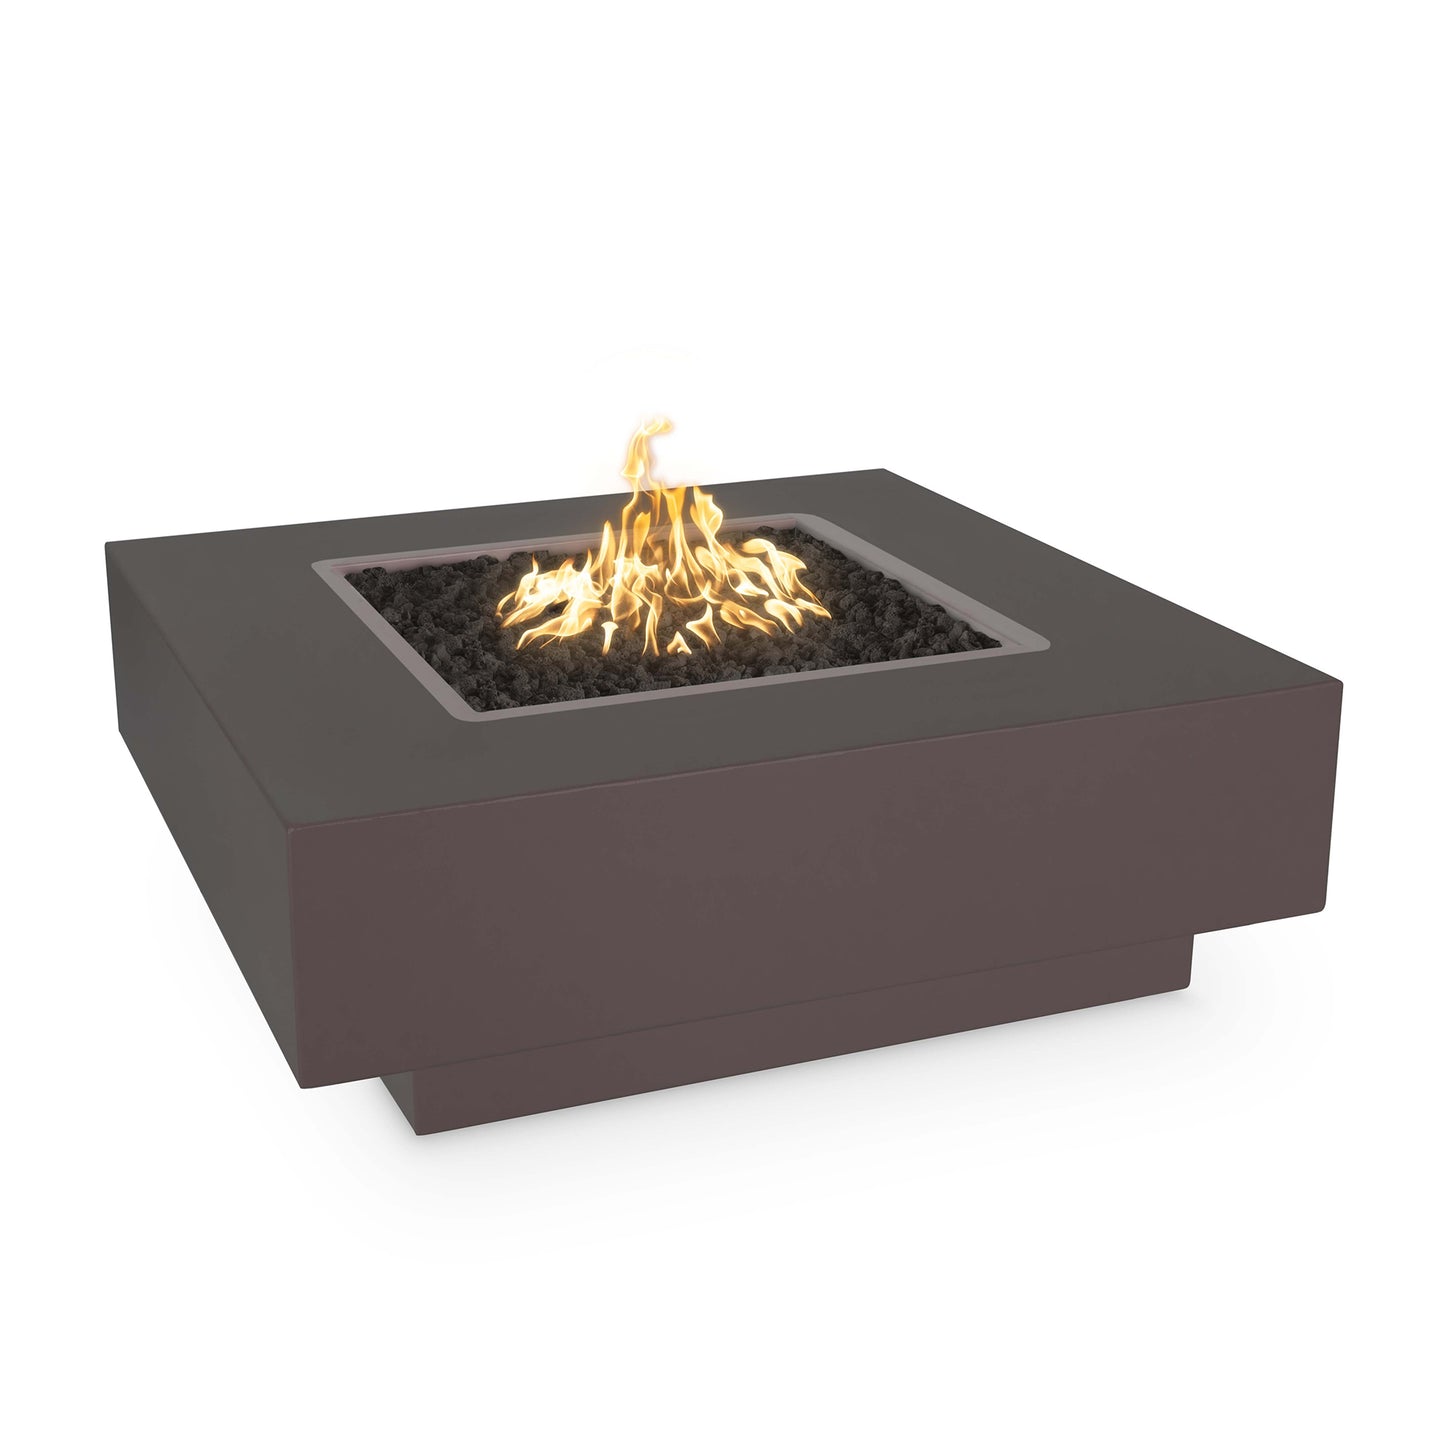 Cabo Square Metal Fire Pit 36" - Electronic Ignition